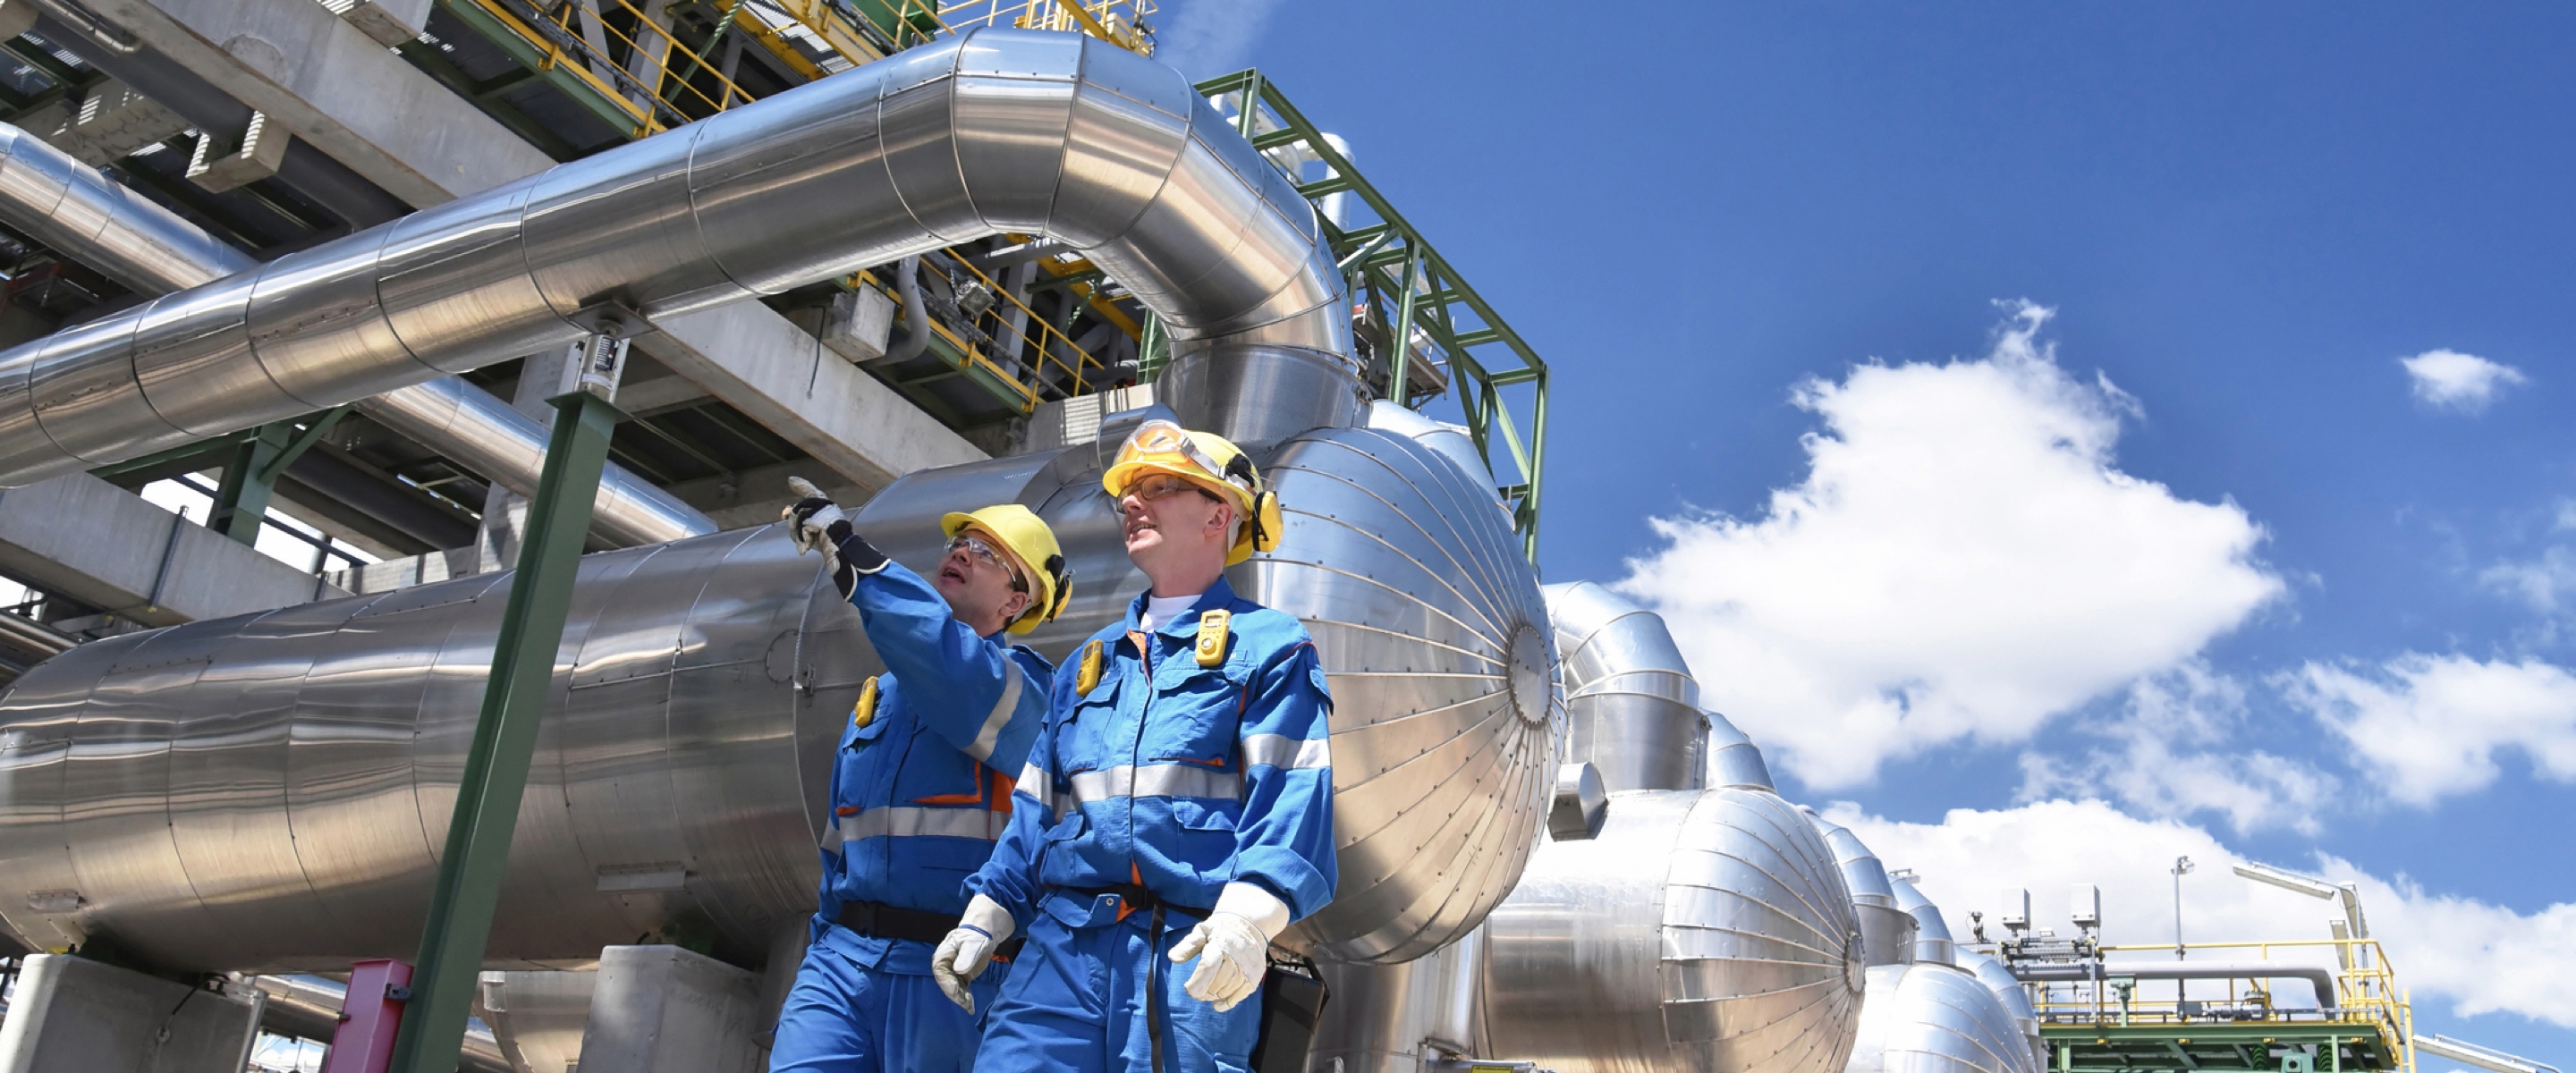 Group of industrial workers in a refinery - oil processing equipment and machinery